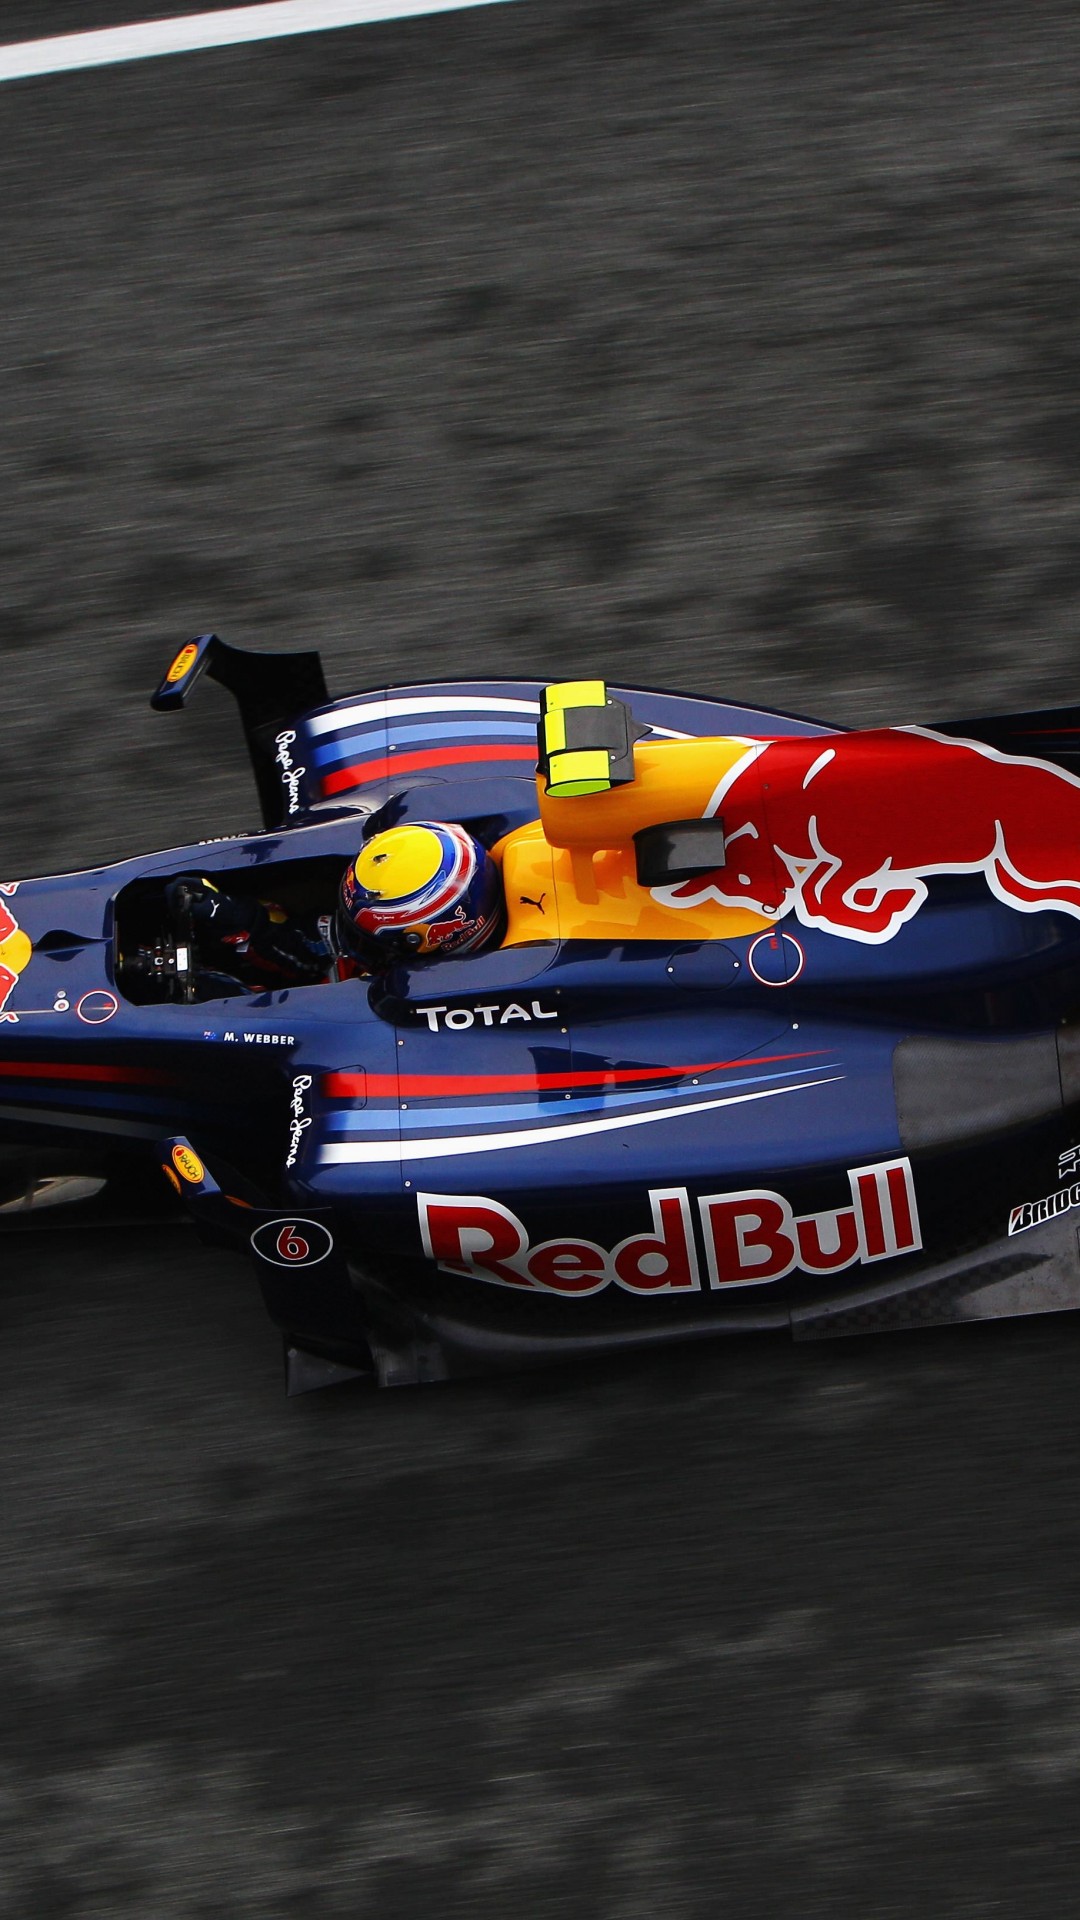 F1 Red Bull Team Wallpaper for SONY Xperia Z3